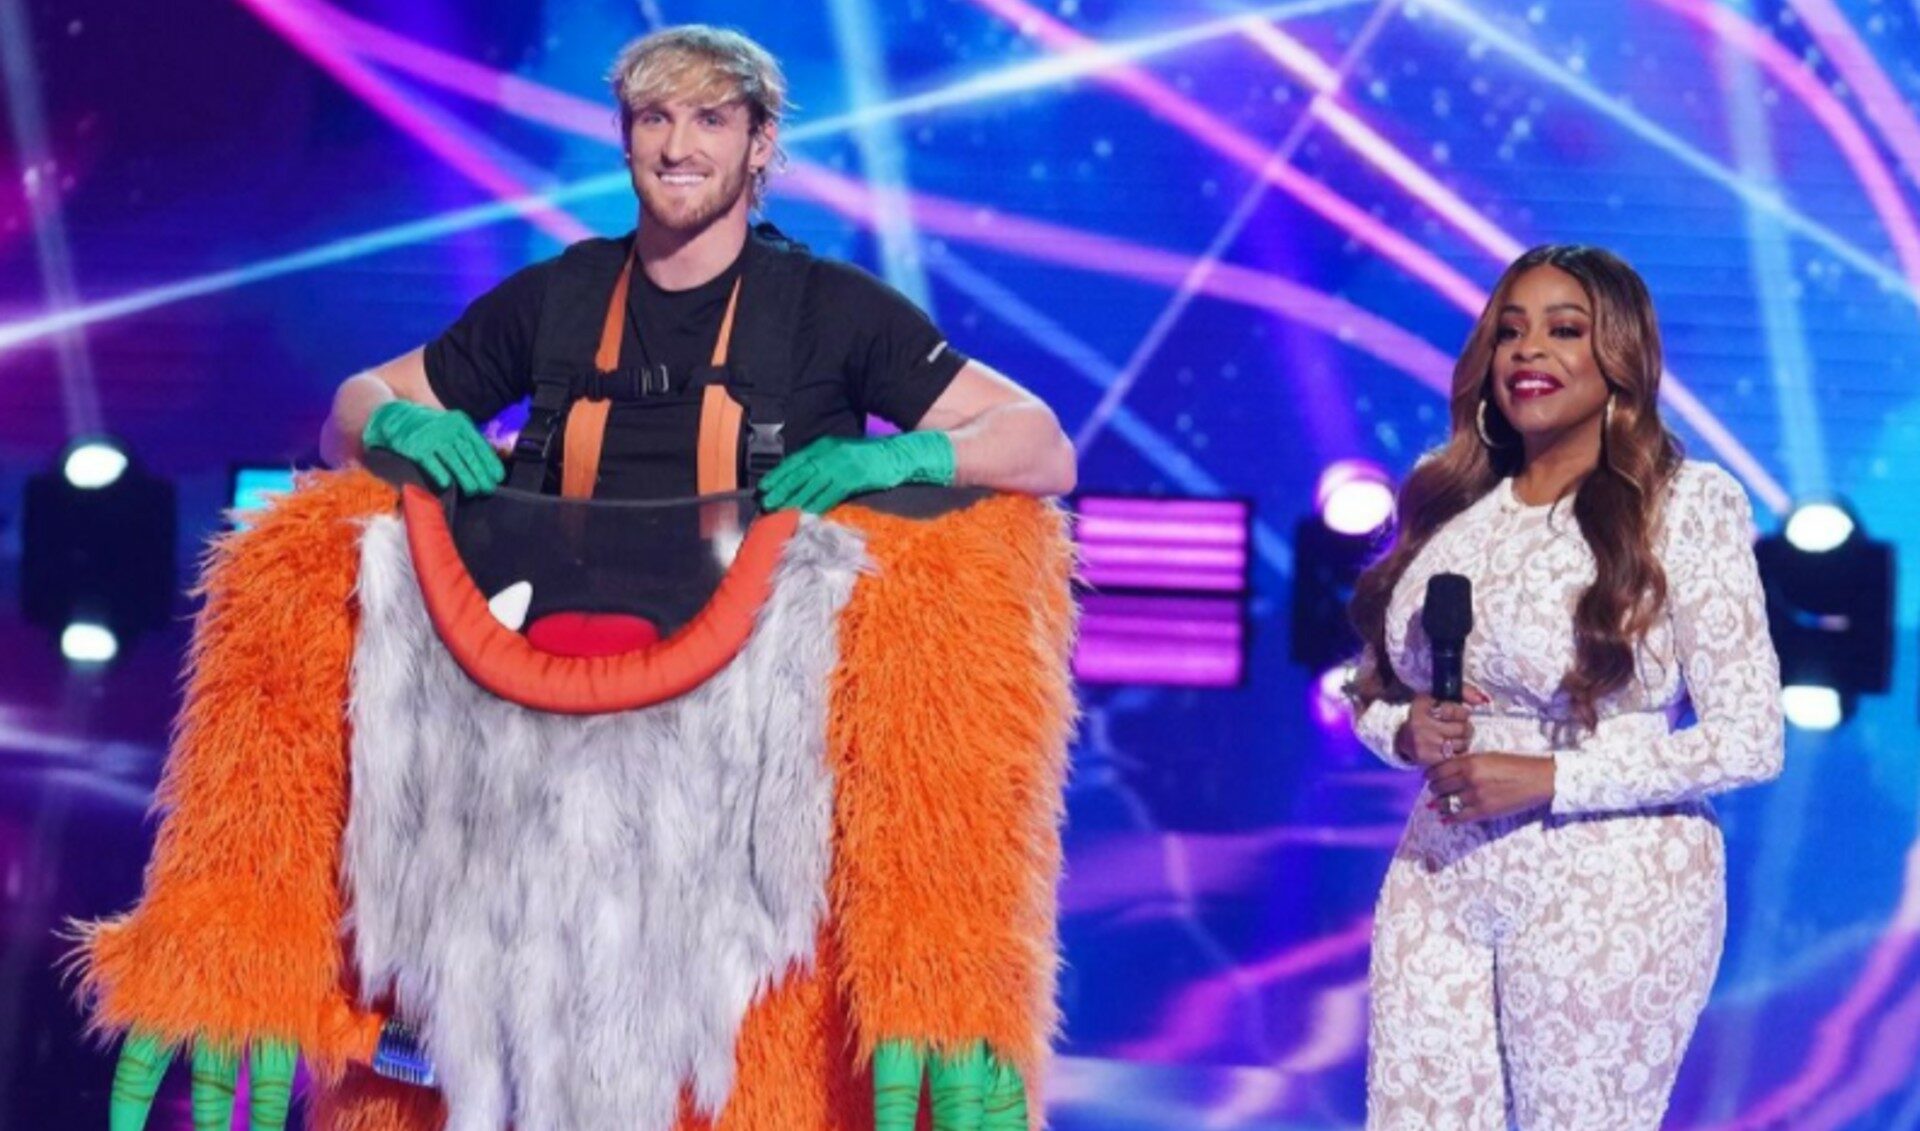 Logan Paul Eliminated From ‘The Masked Singer’ Following “Bad Reputation” Performance